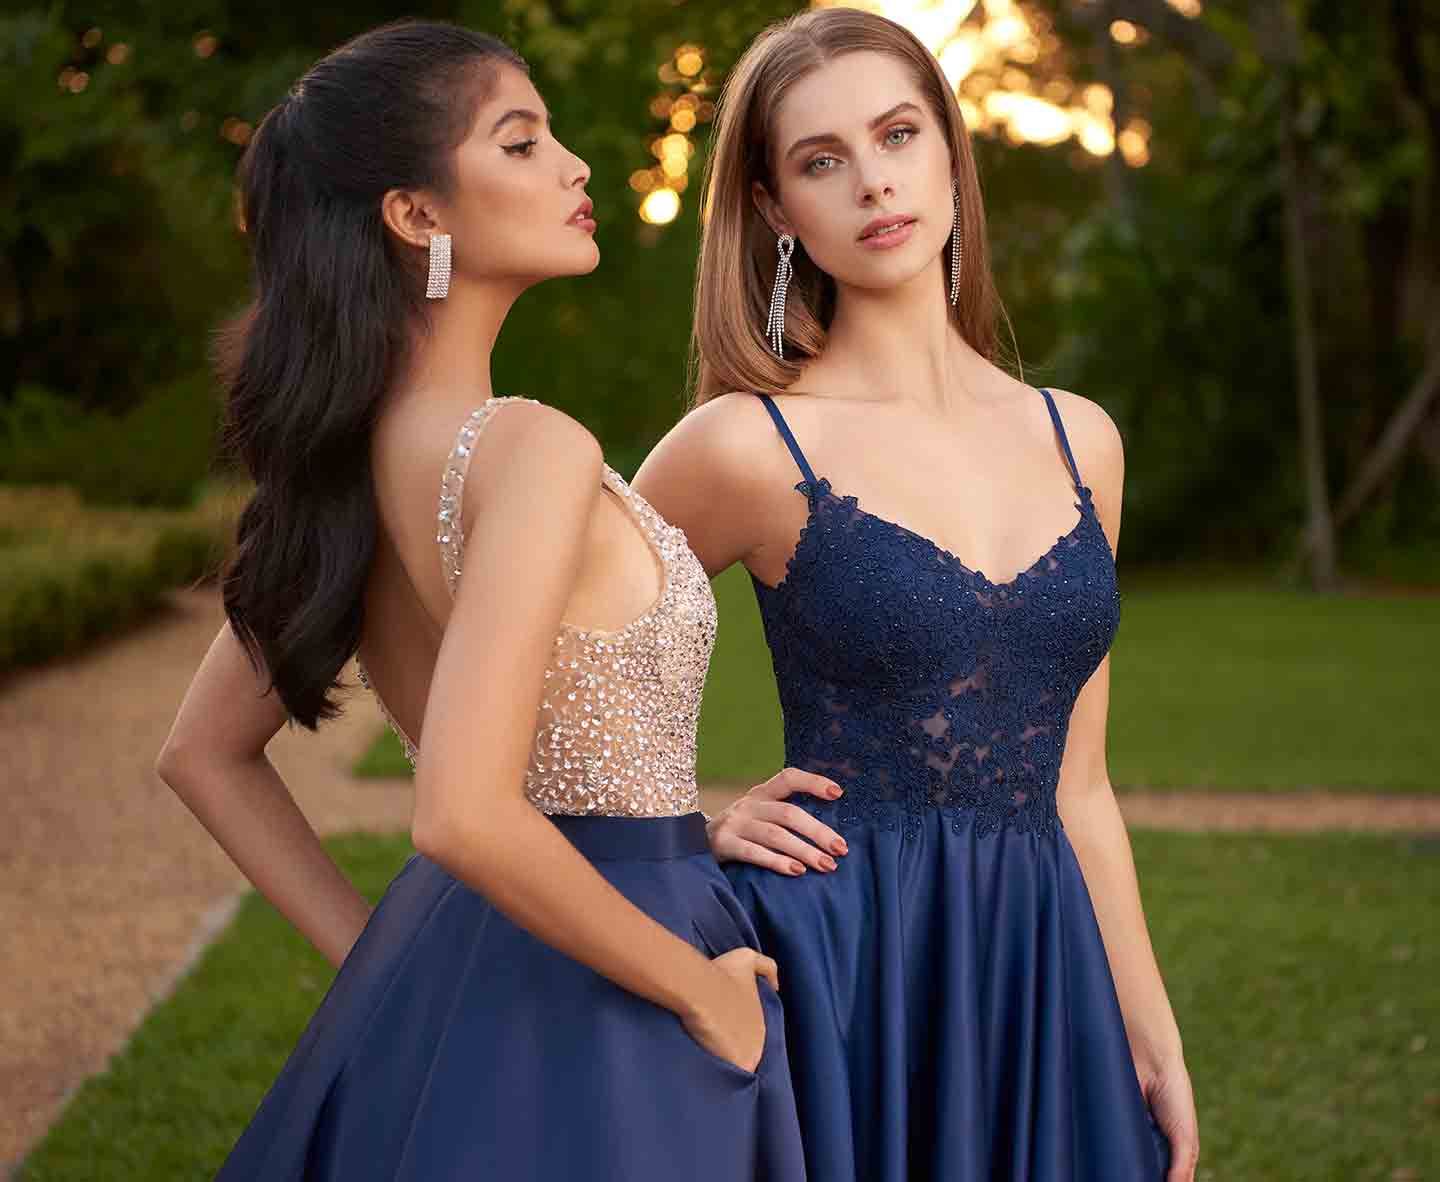 Current Perfect Prom Look Hairstyles Regarding Prom Shoes, Jewelry, And Accessories – Promgirl (View 20 of 20)